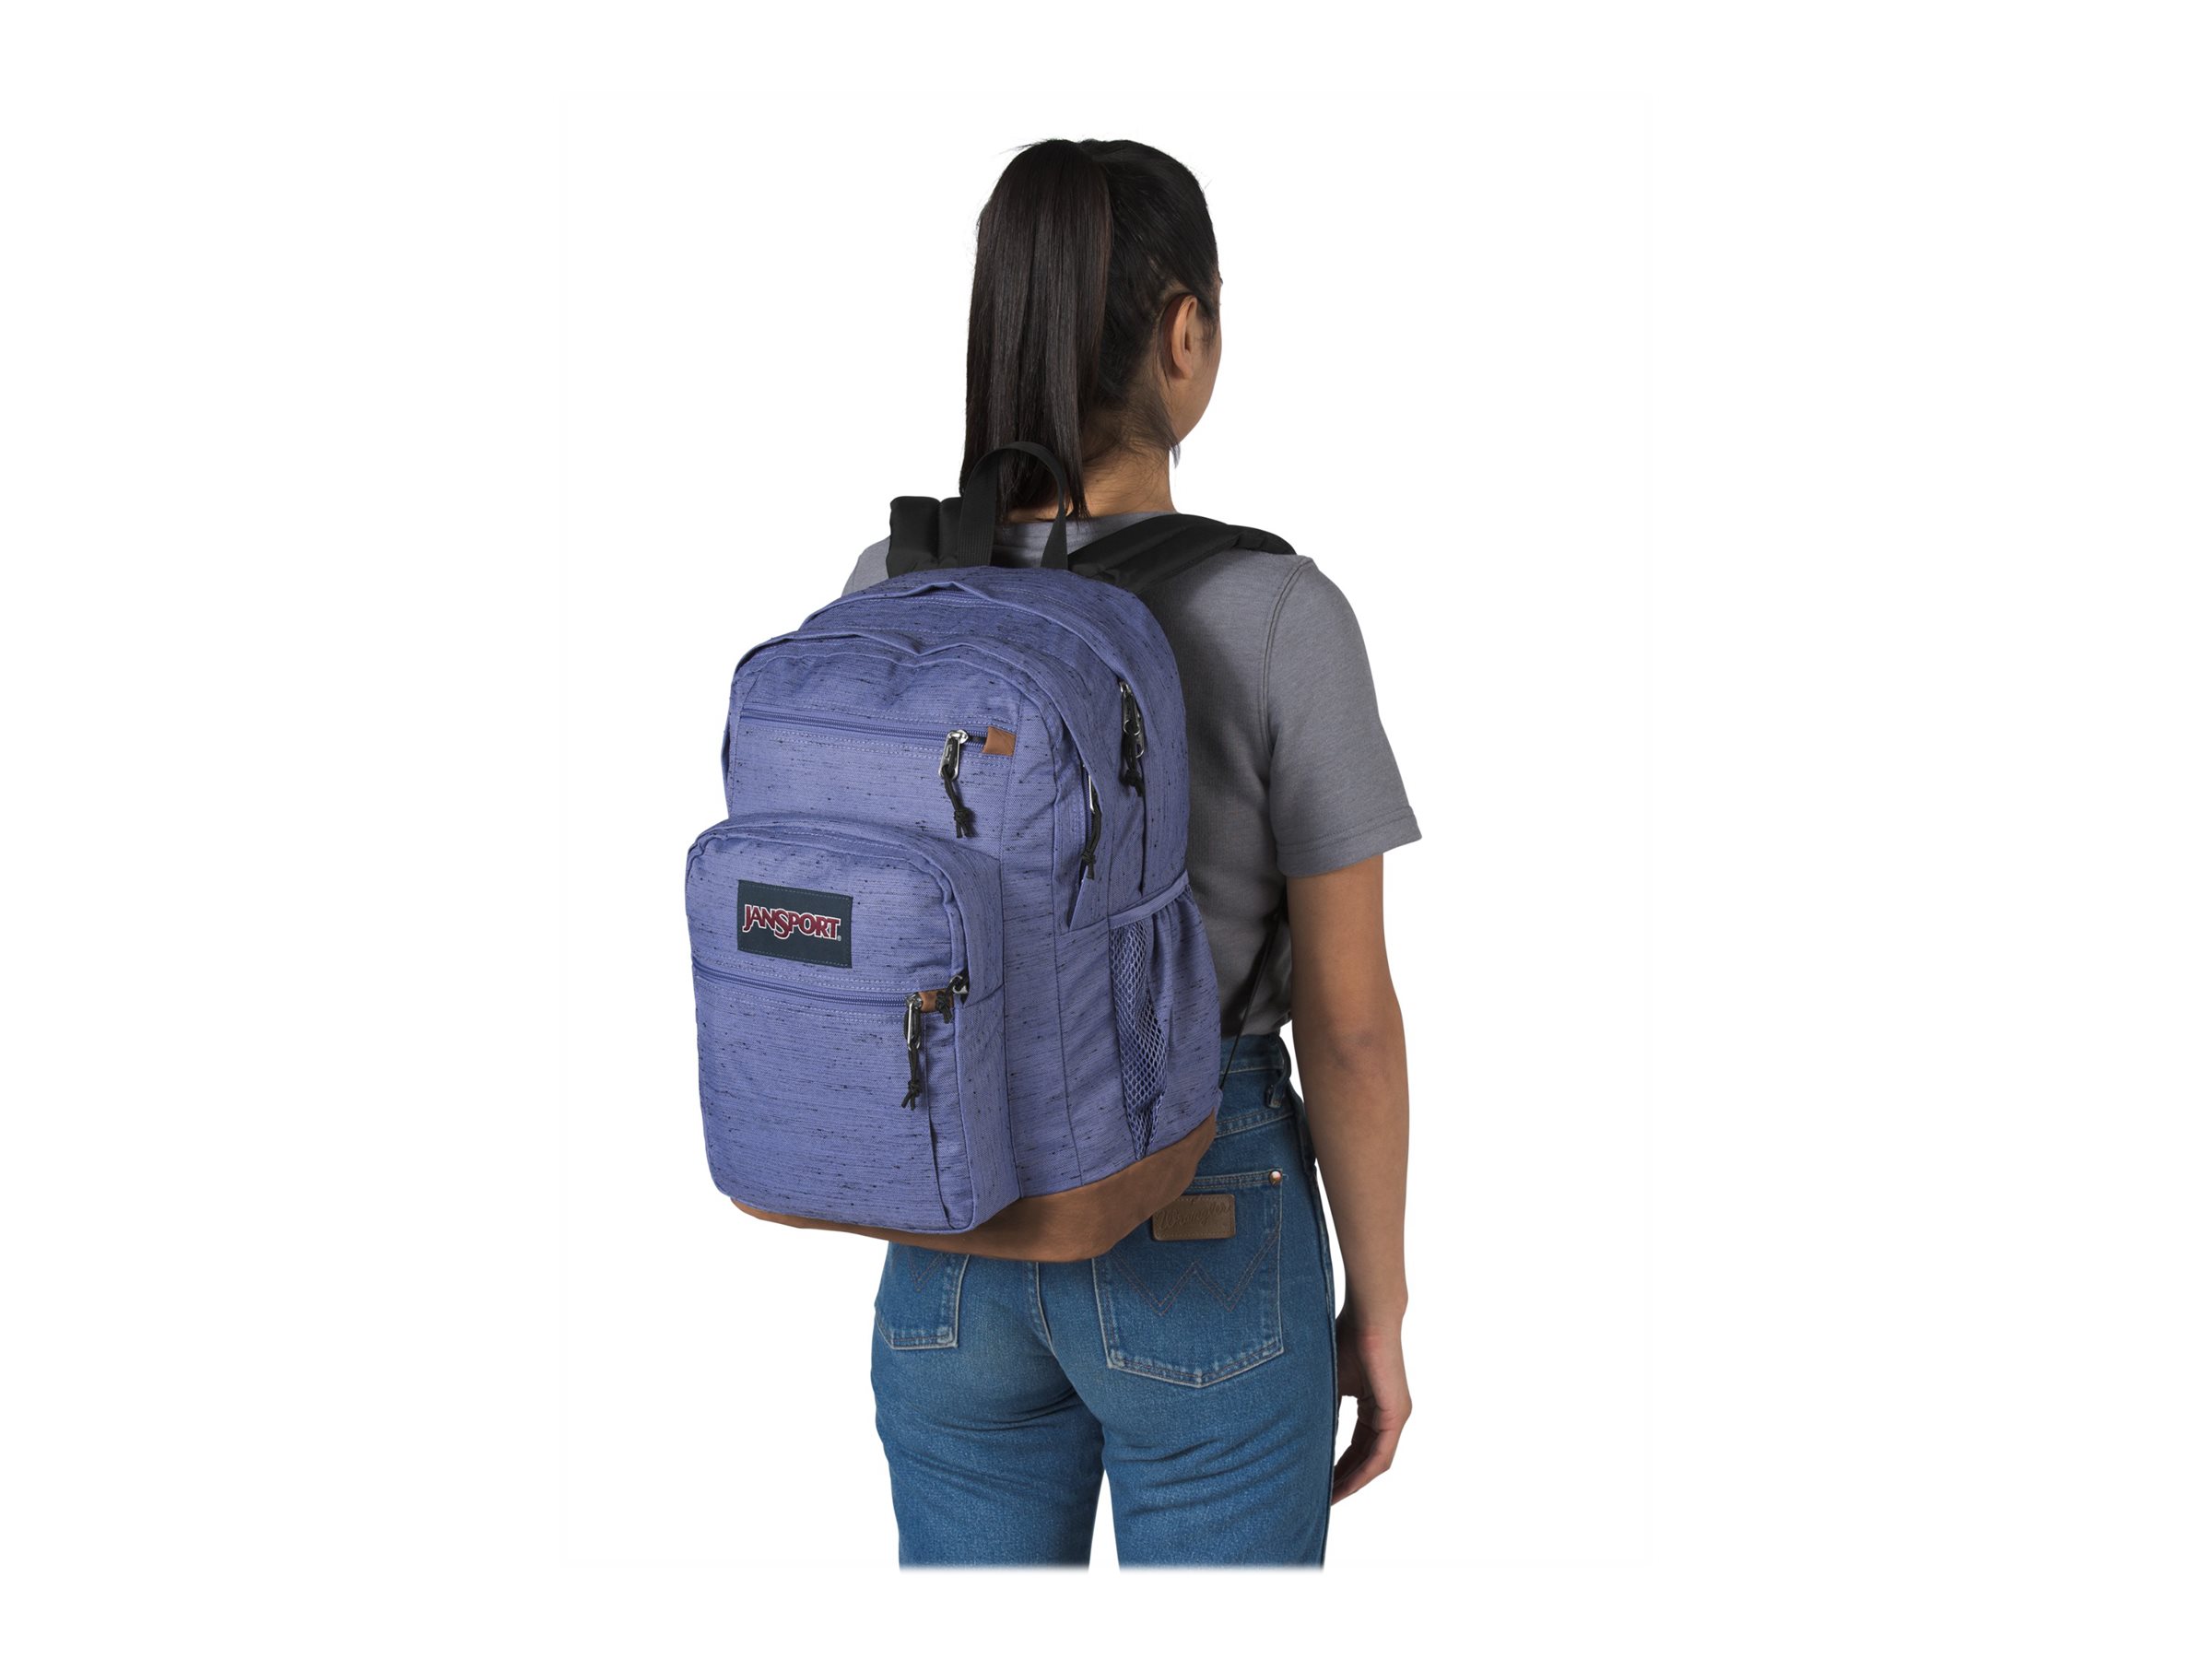 JanSport Cool Student - Notebook carrying backpack - 15" - image 2 of 4